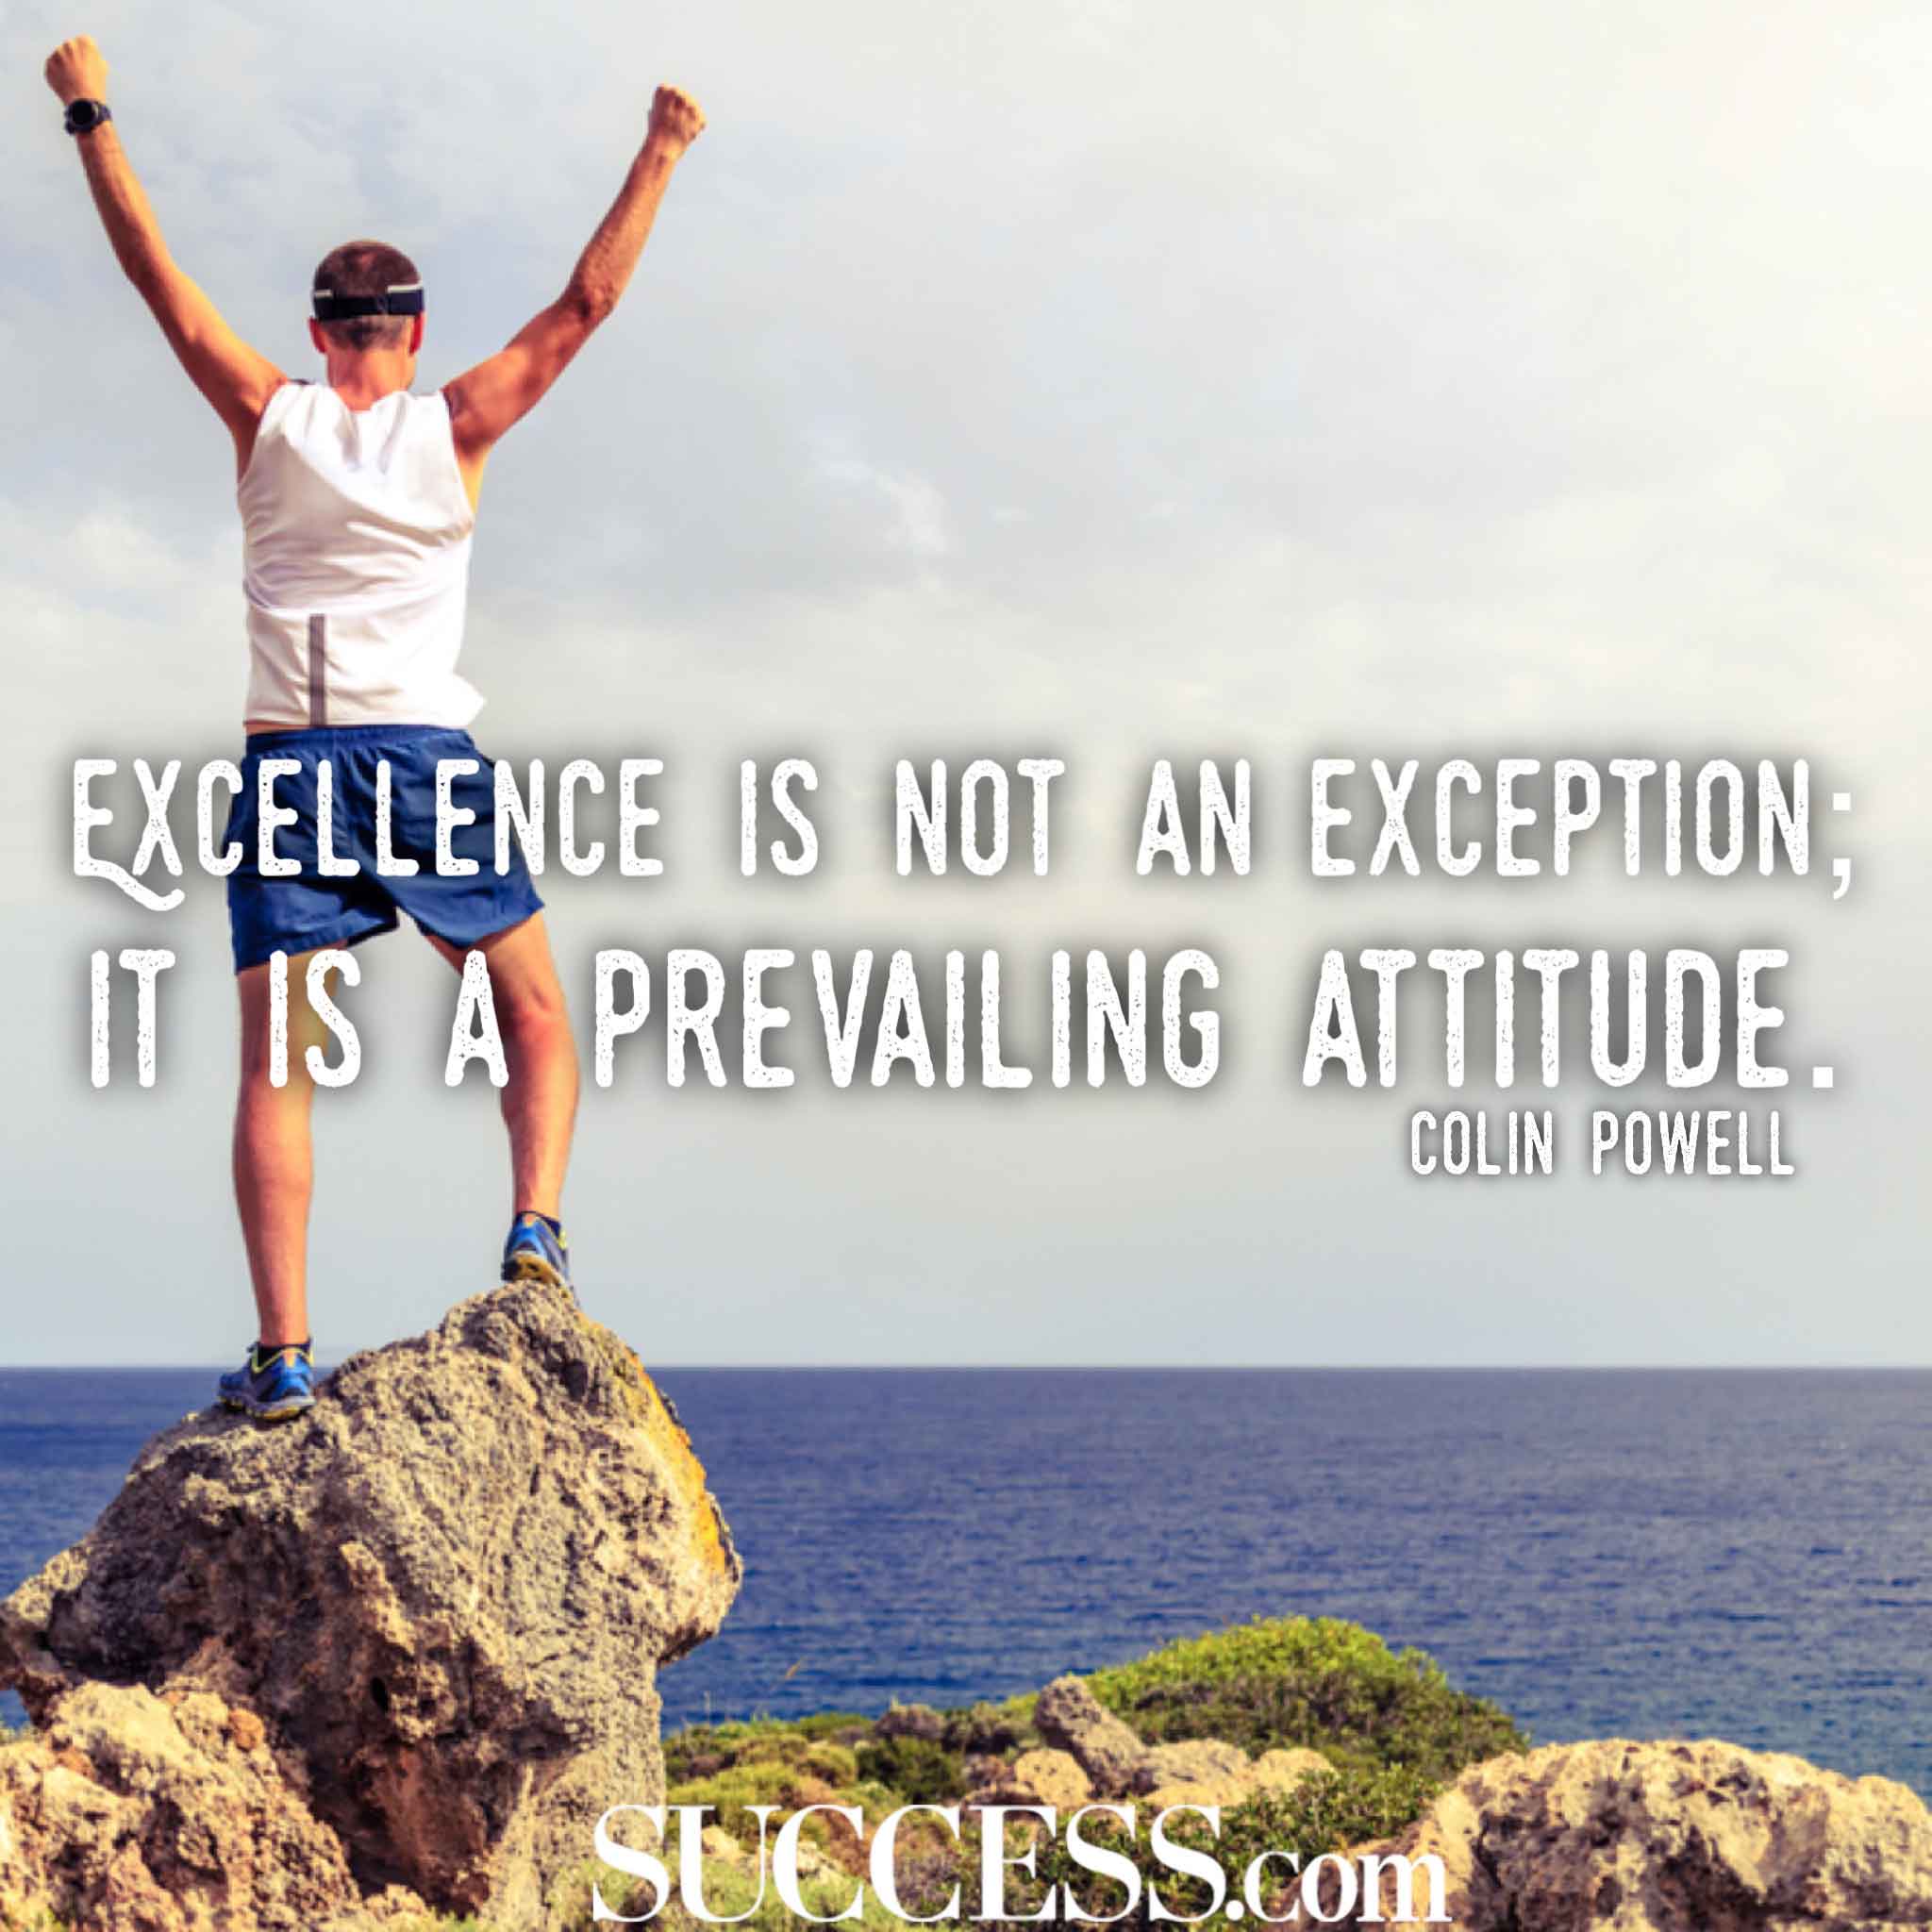 13 Motivational Quotes to Inspire Excellence